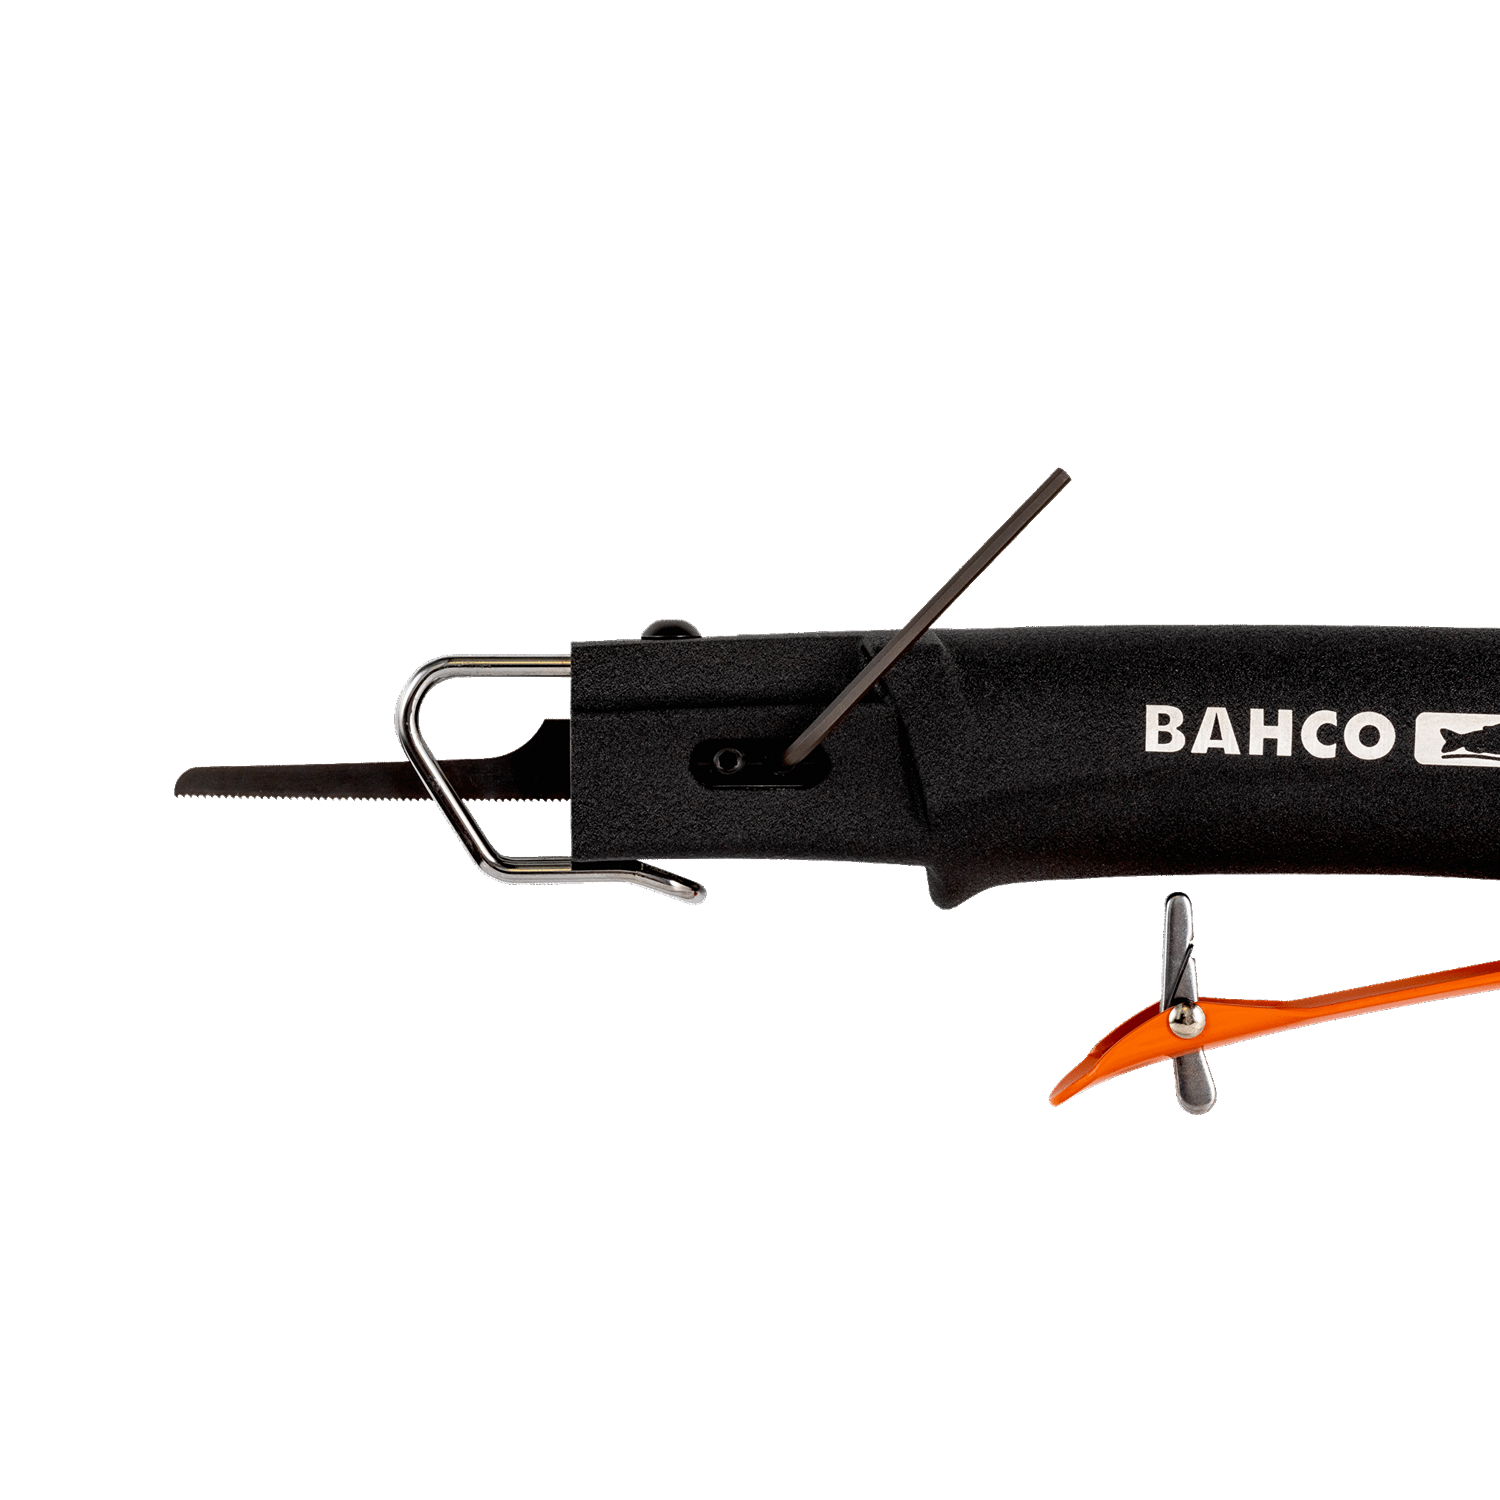 BAHCO BP828 Compact Reciprocating Saw with Safety Trigger - Premium Reciprocating Saw from BAHCO - Shop now at Yew Aik.